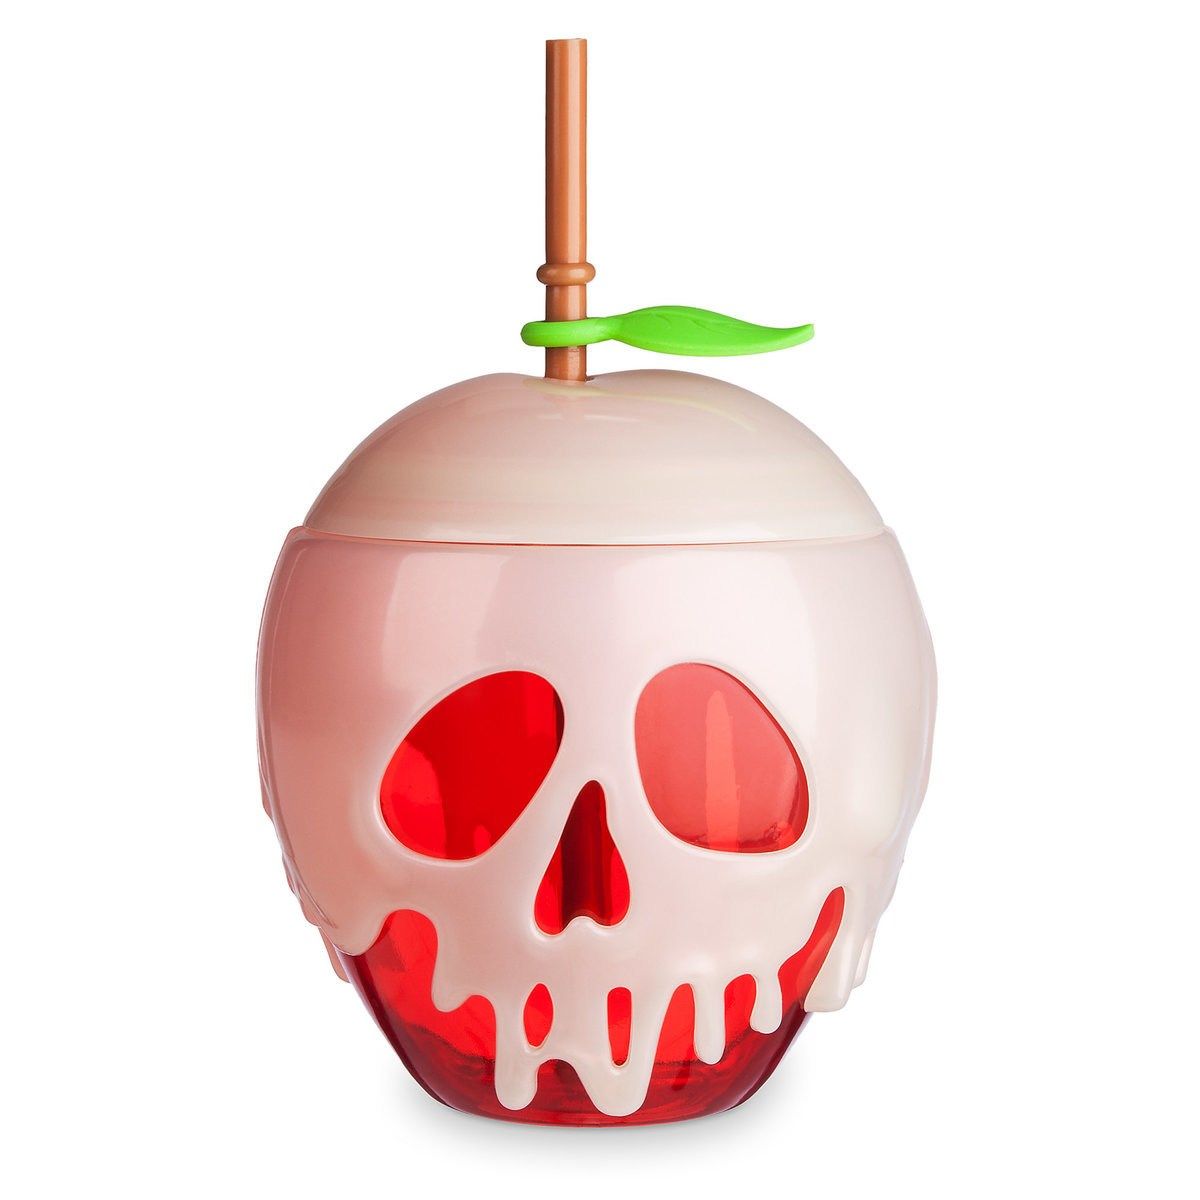 Snow White's poisoned apple cup